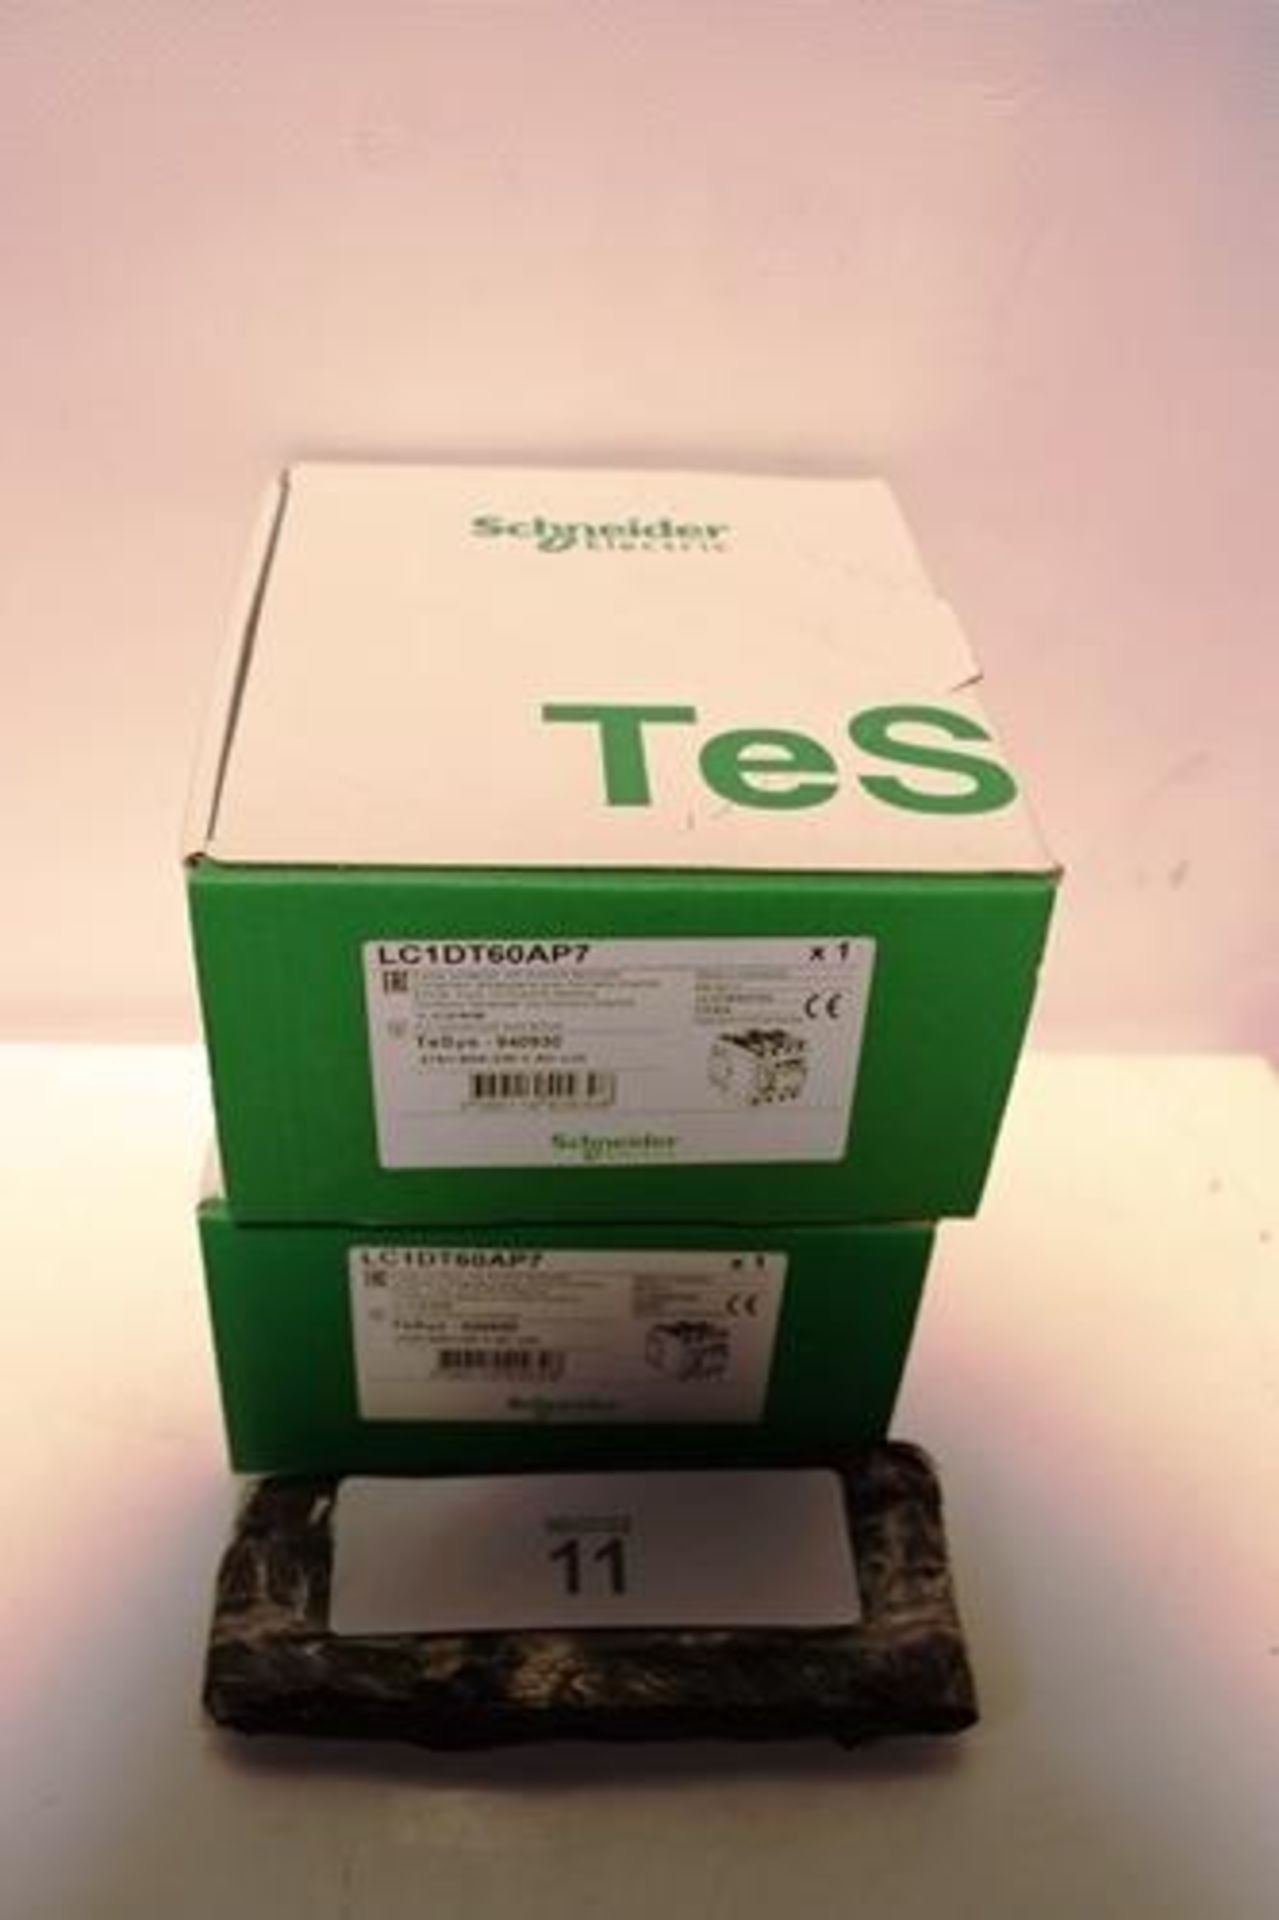 2 x Schneider 4 pole contactor with Everlink terminals, model LC1DT60AP7 - New in box (SW8)